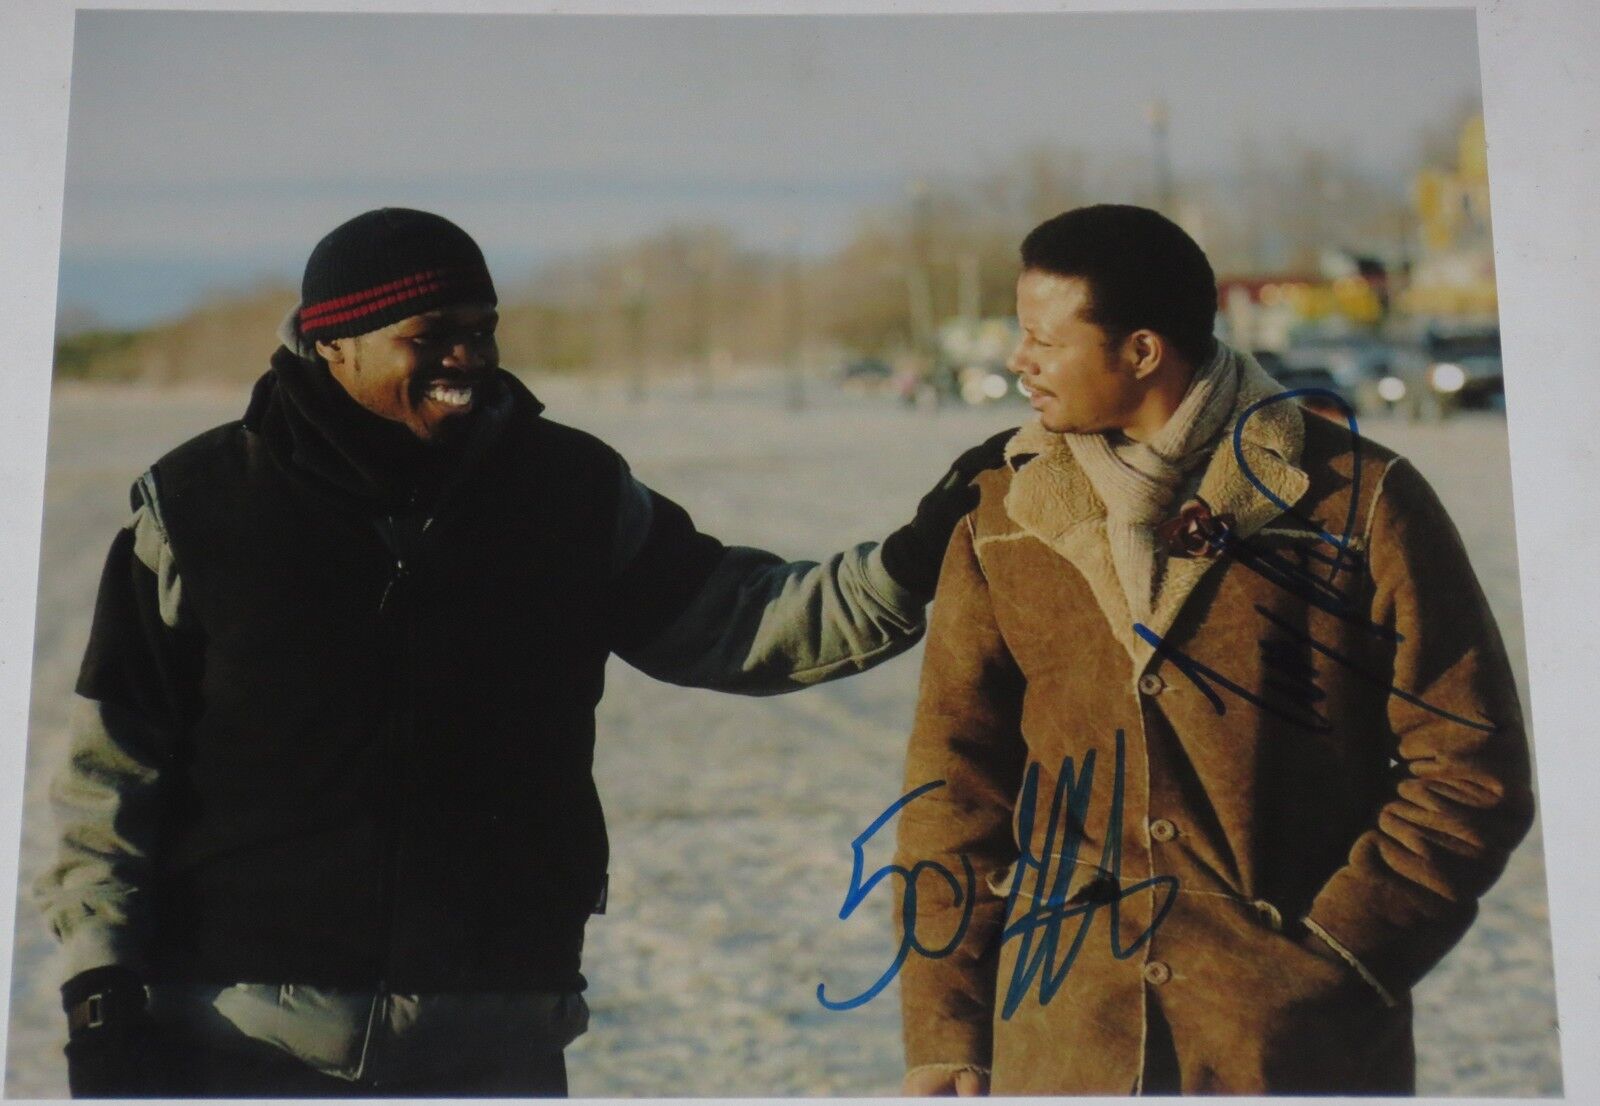 50 CENT CURTIS JACKSON TERRENCE HOWARD SIGNED 8X10 PHOTO GET RICH OR DIE TRYIN 